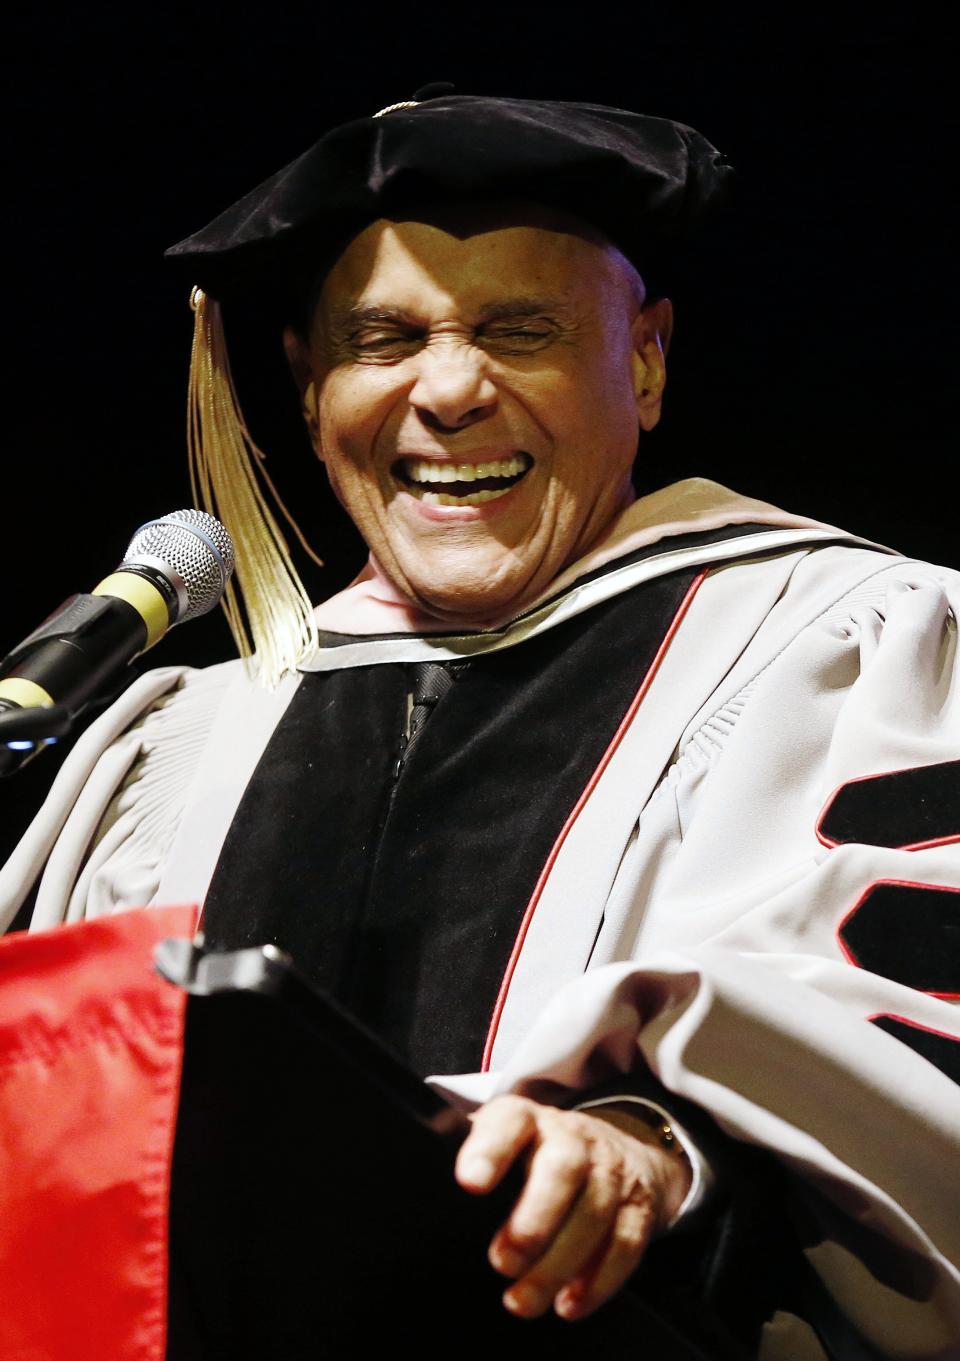 Harry Belafonte laughs while speaking after receiving an honorary doctor of music from Berklee College of Music at the Berklee Performance Center in Boston, Thursday, March 6, 2014. (AP Photo/Michael Dwyer)